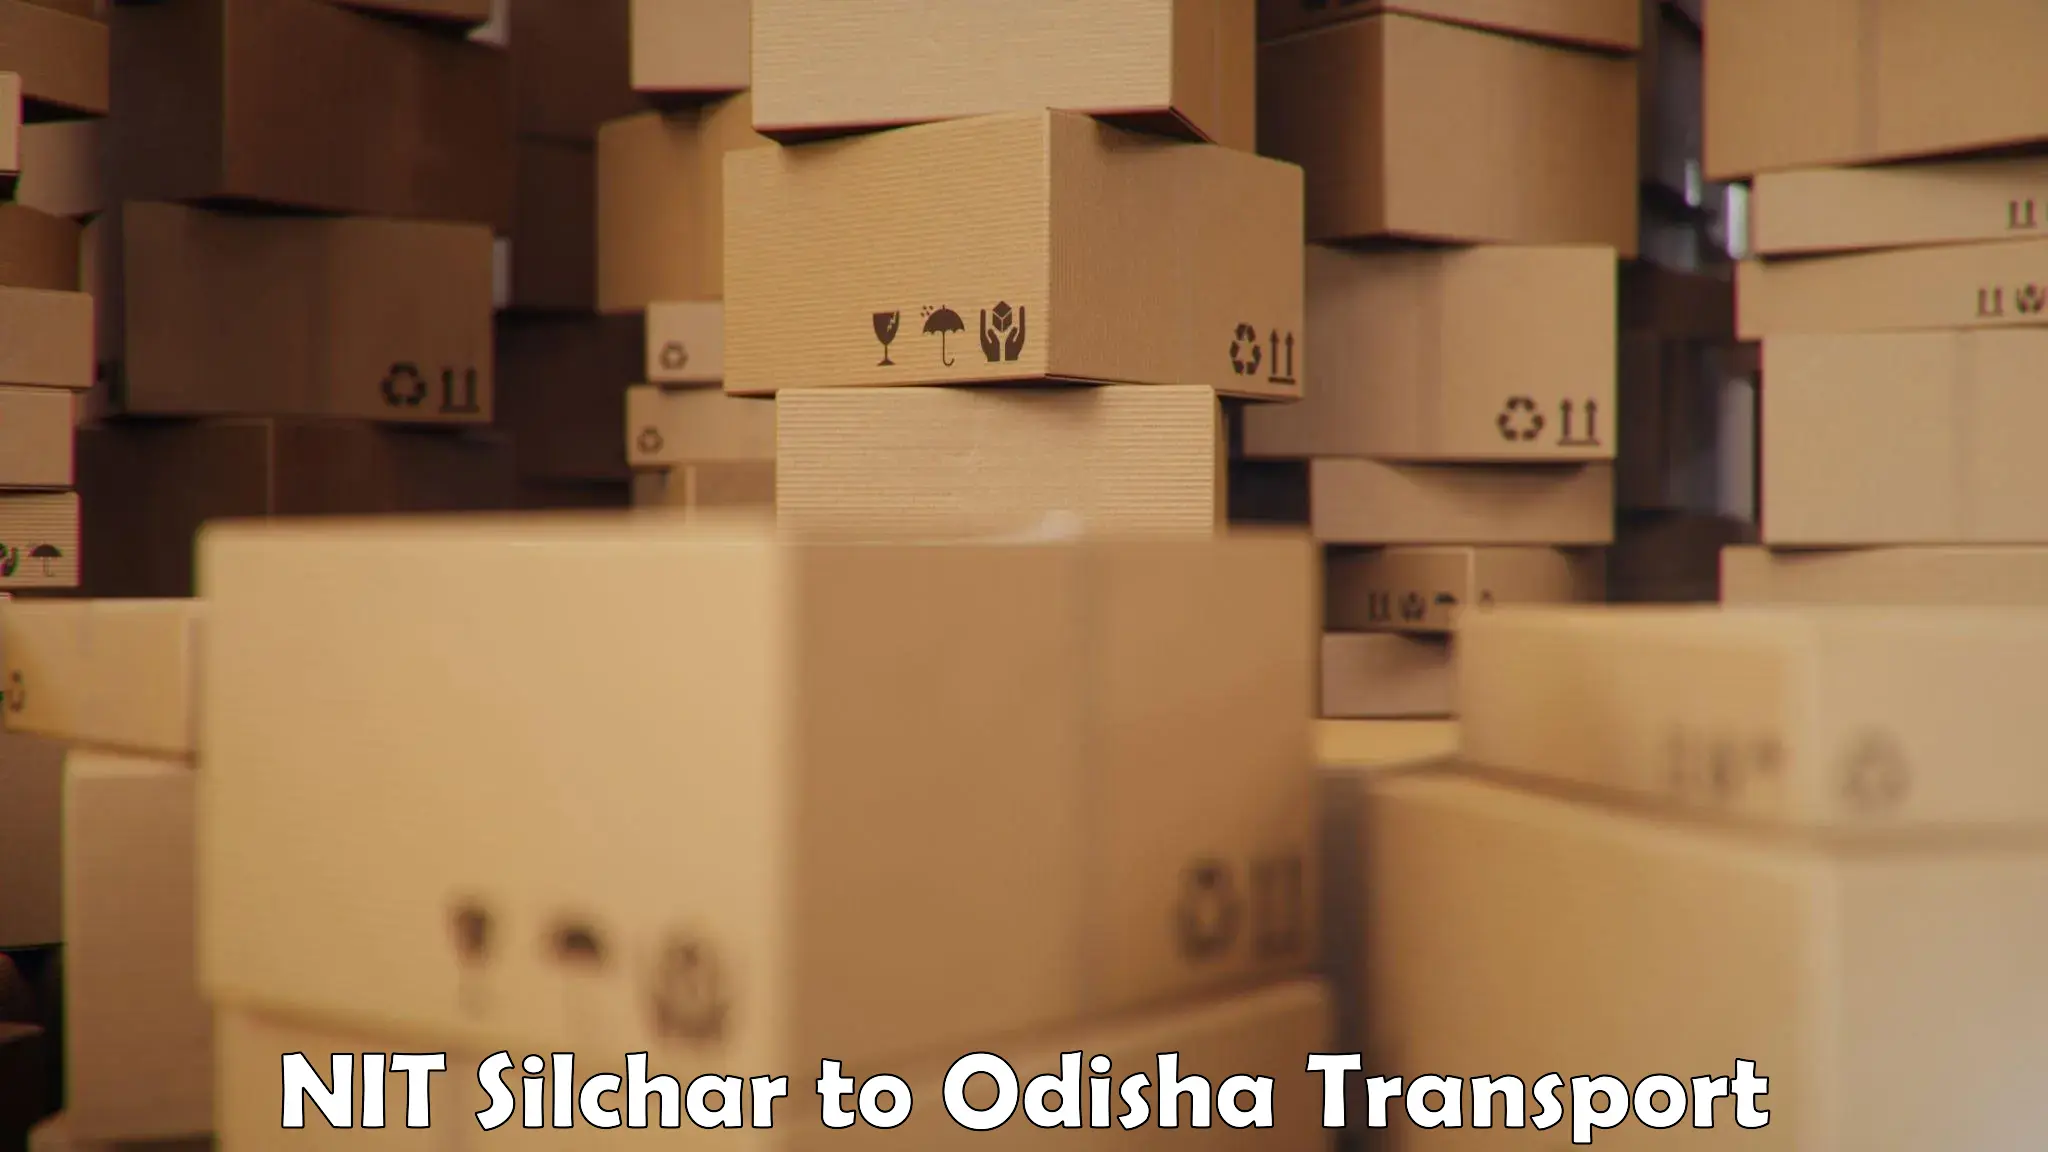 Material transport services NIT Silchar to Chandbali